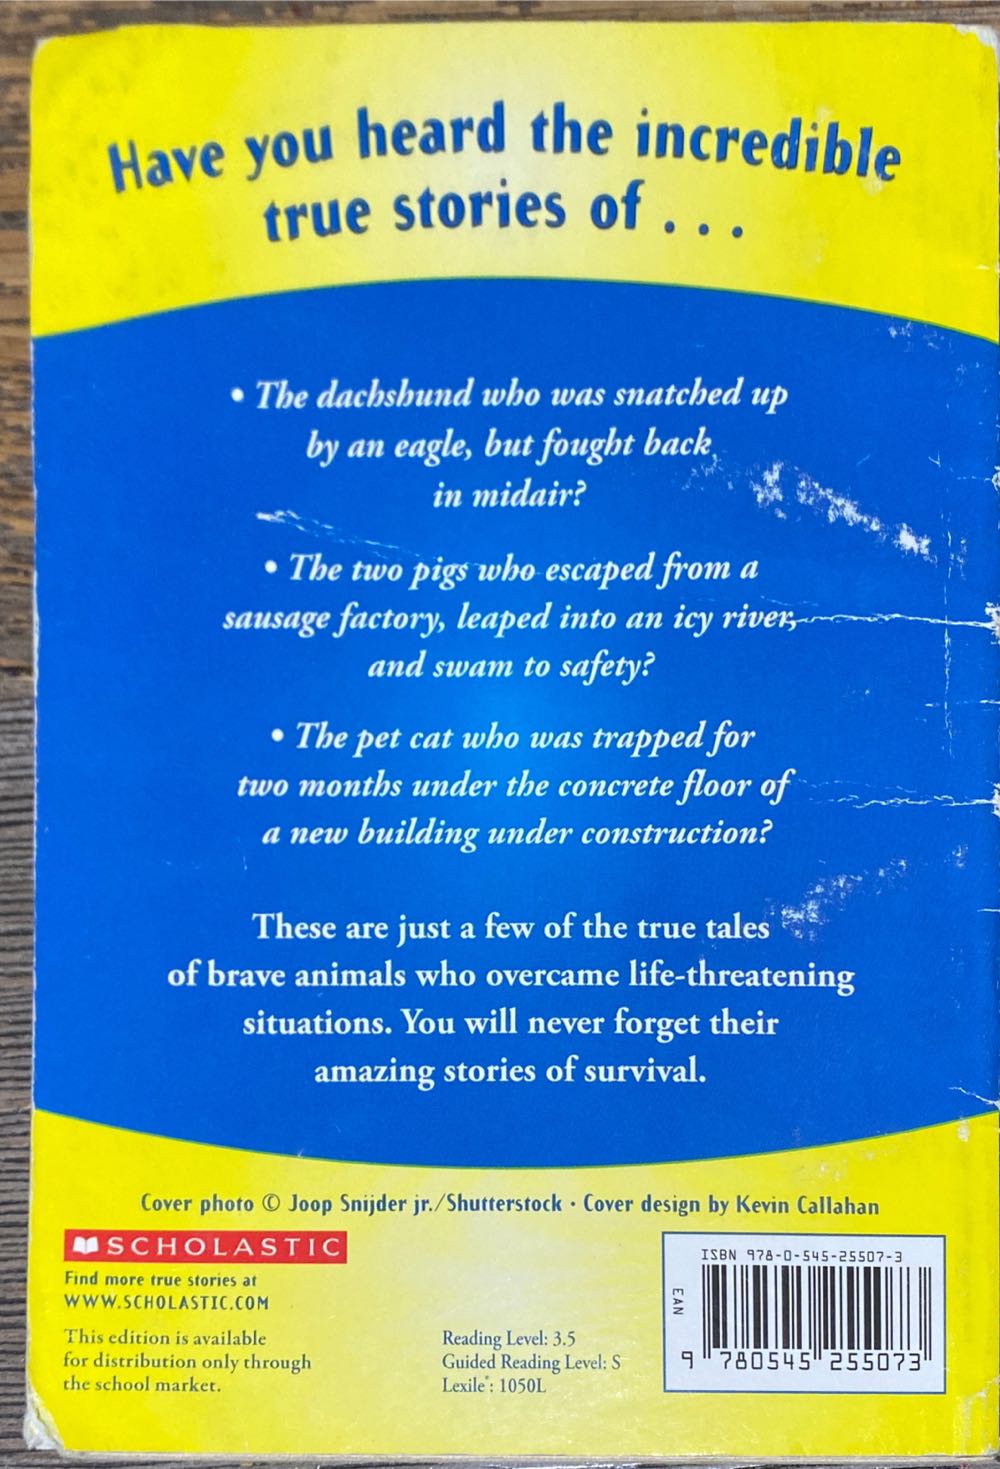 Miracle Pets True Tales Of Courage And Survival - Allan Zullo (Scholastic Inc - Paperback) book collectible [Barcode 9780545255073] - Main Image 2